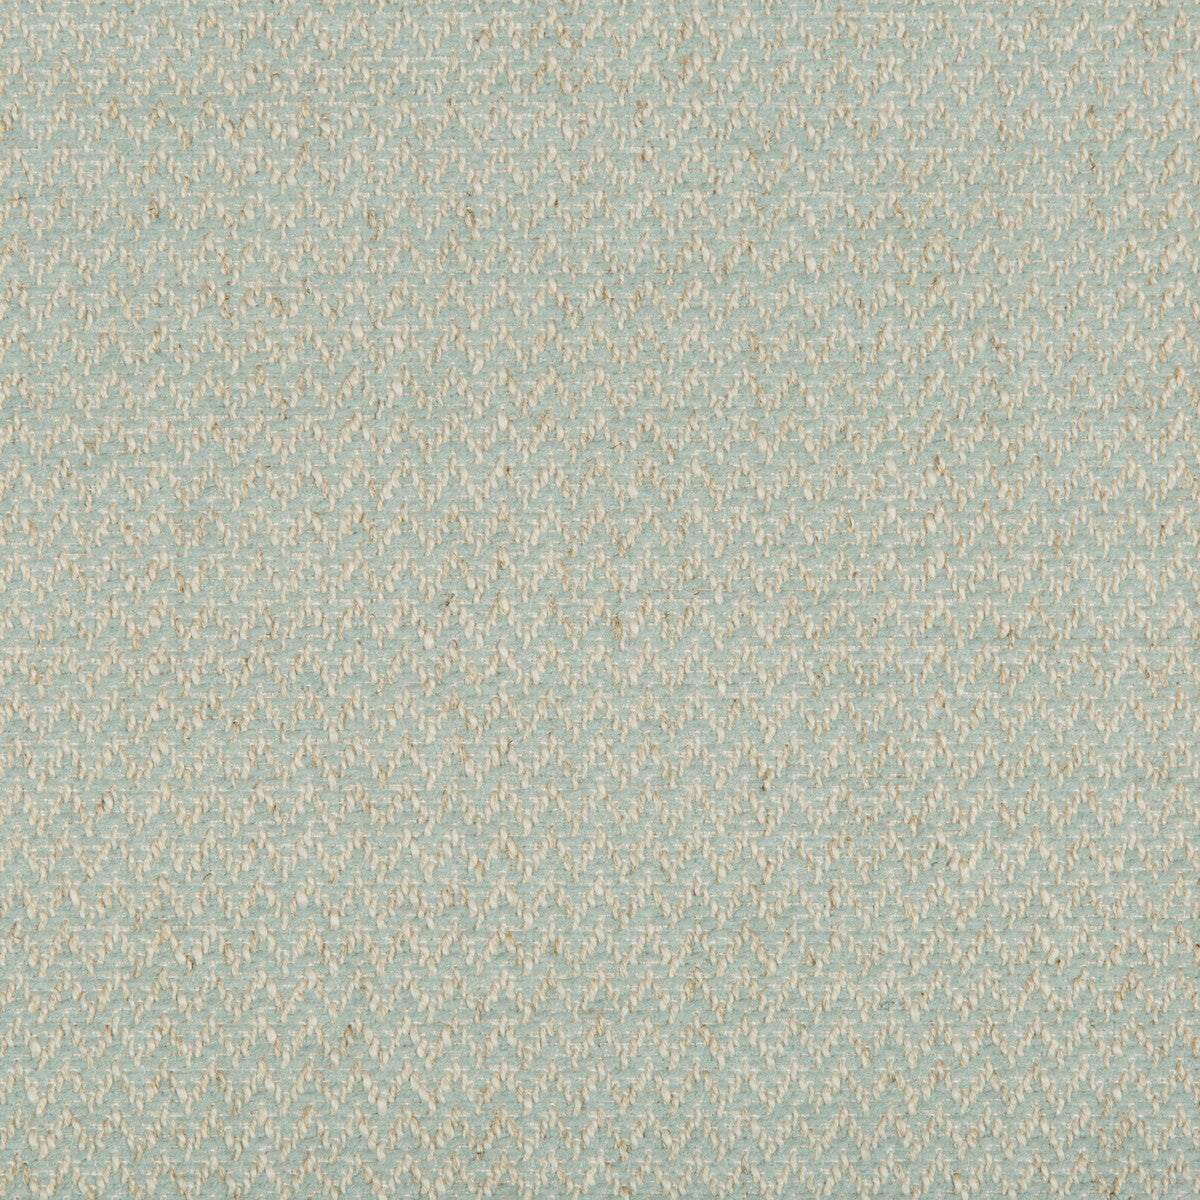 Kravet Smart fabric in 35394-23 color - pattern 35394.23.0 - by Kravet Smart in the Performance Crypton Home collection